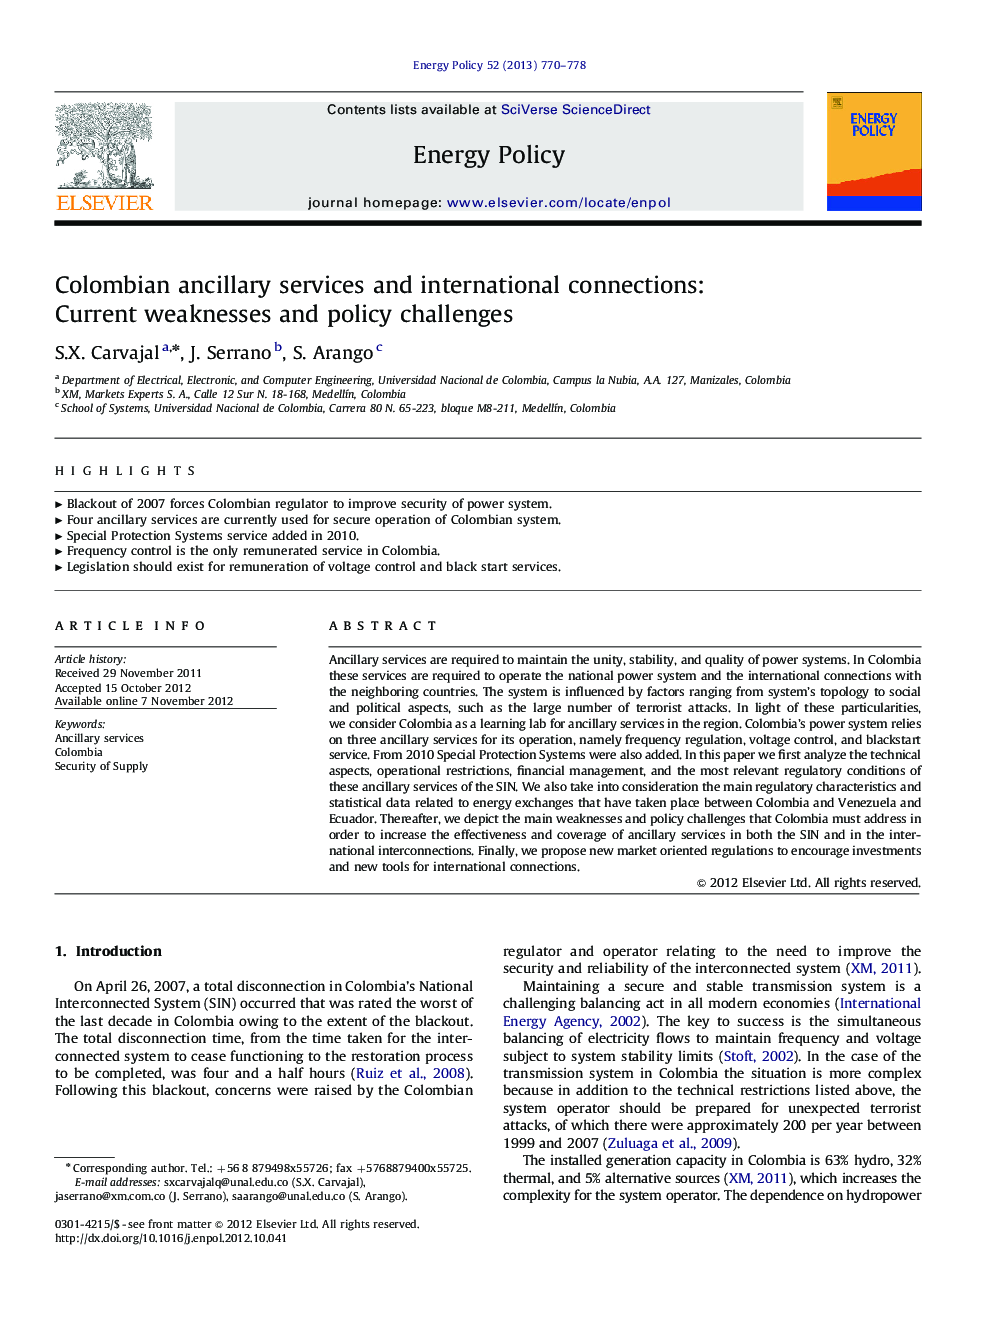 Colombian ancillary services and international connections: Current weaknesses and policy challenges